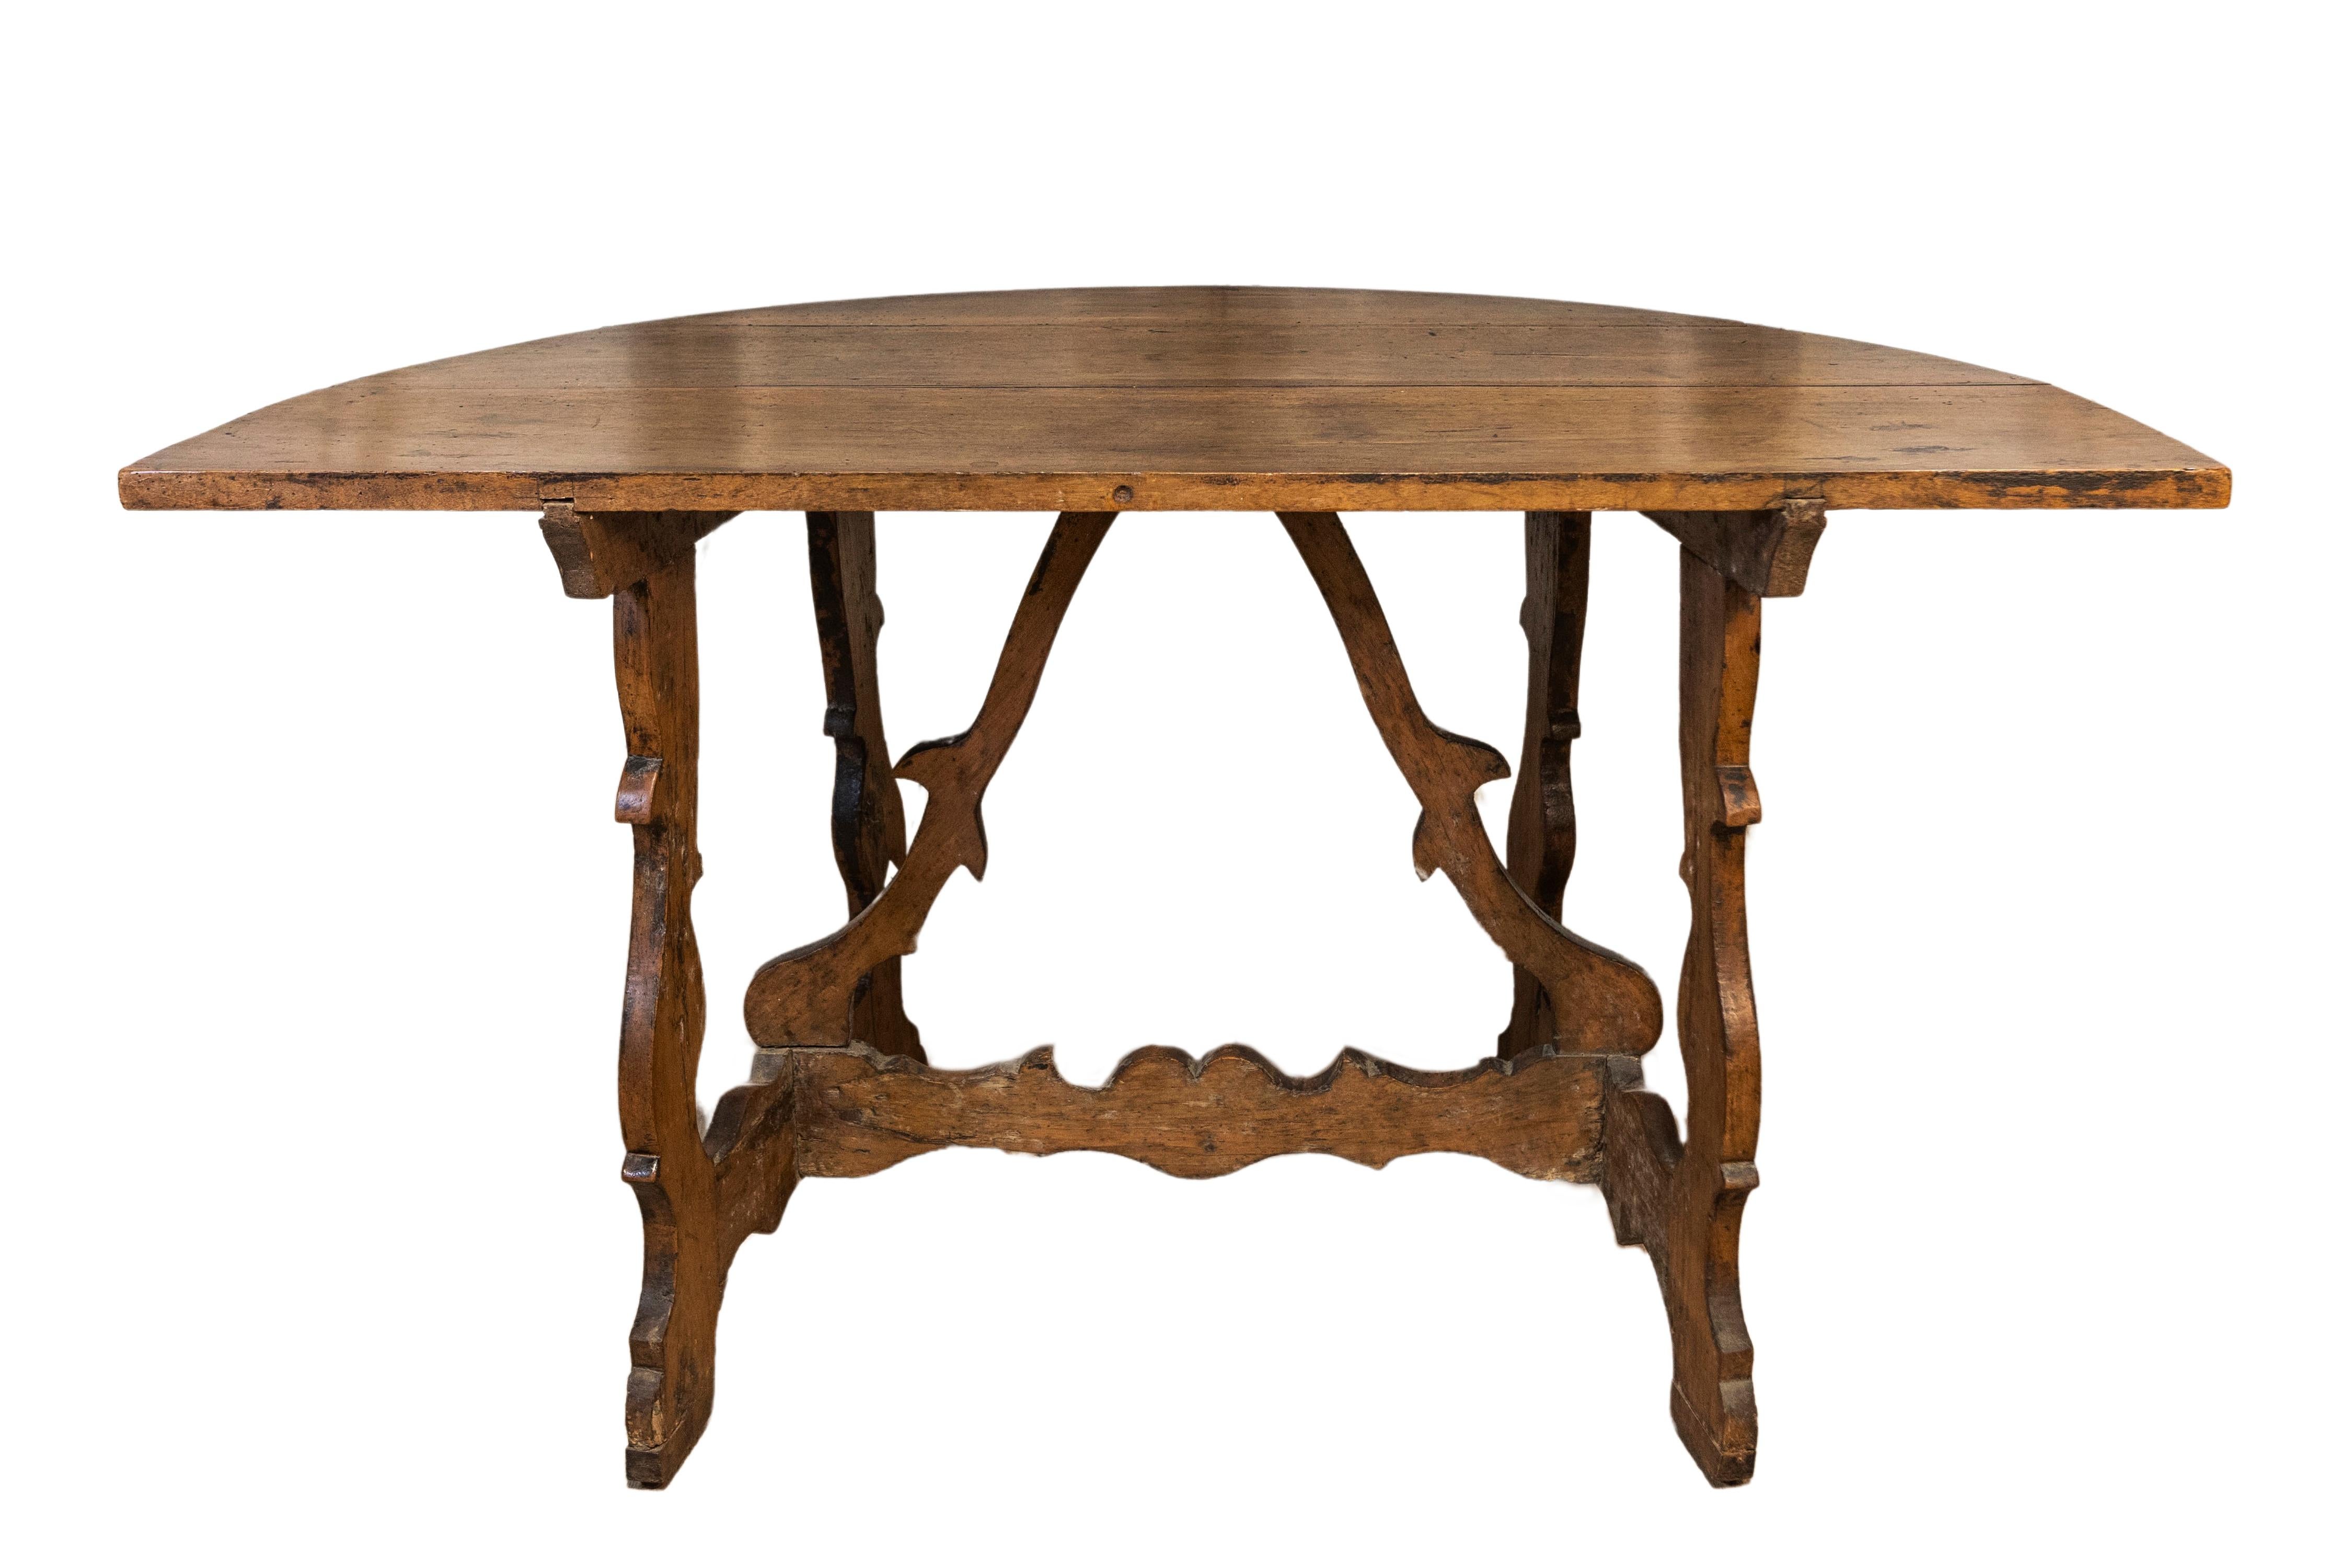 17th Century Italian Baroque Period Walnut Demilune Table with Carved Lyre Base In Good Condition For Sale In Atlanta, GA